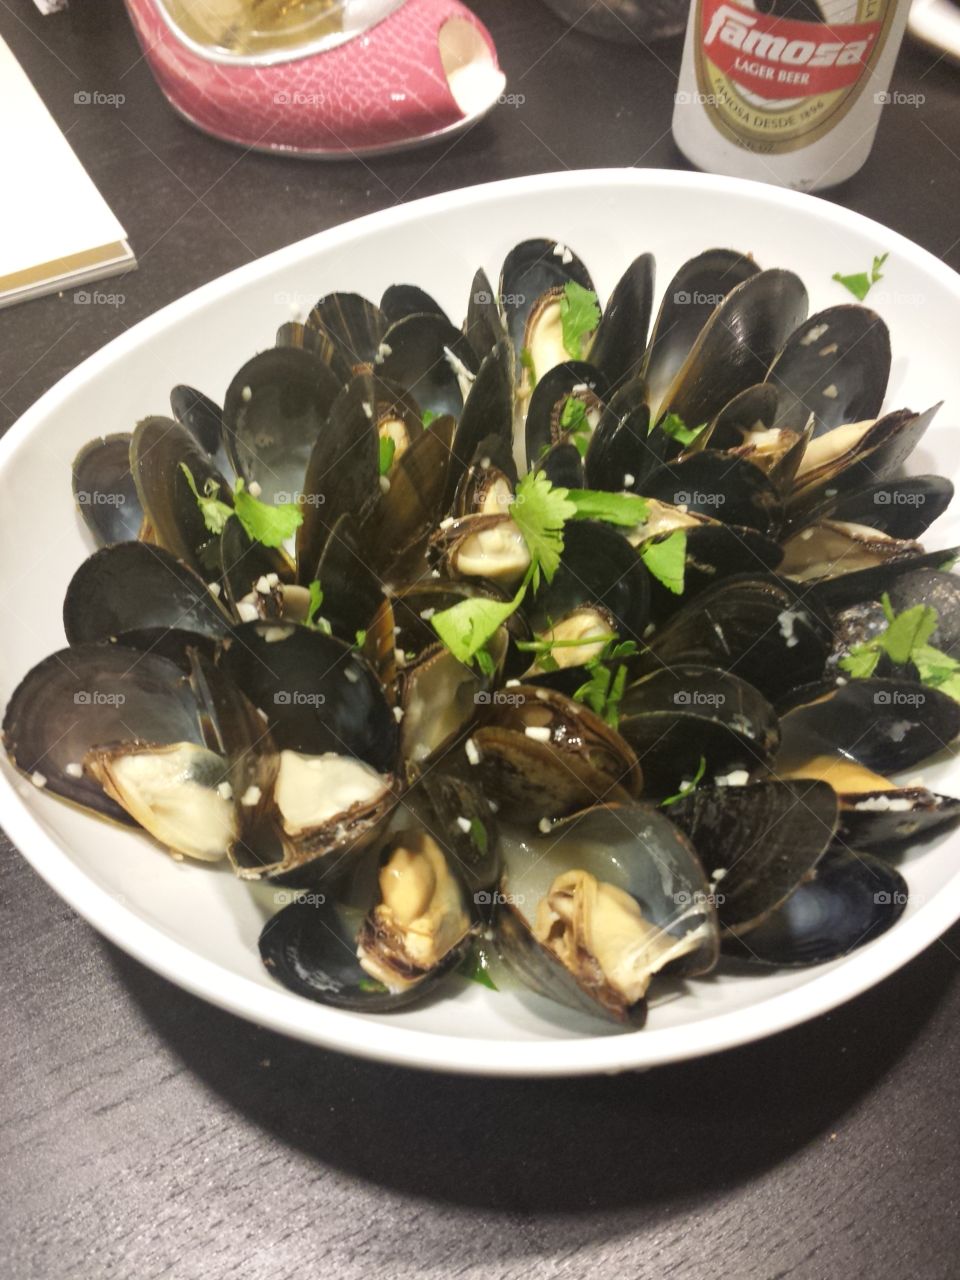 mussels for dinner